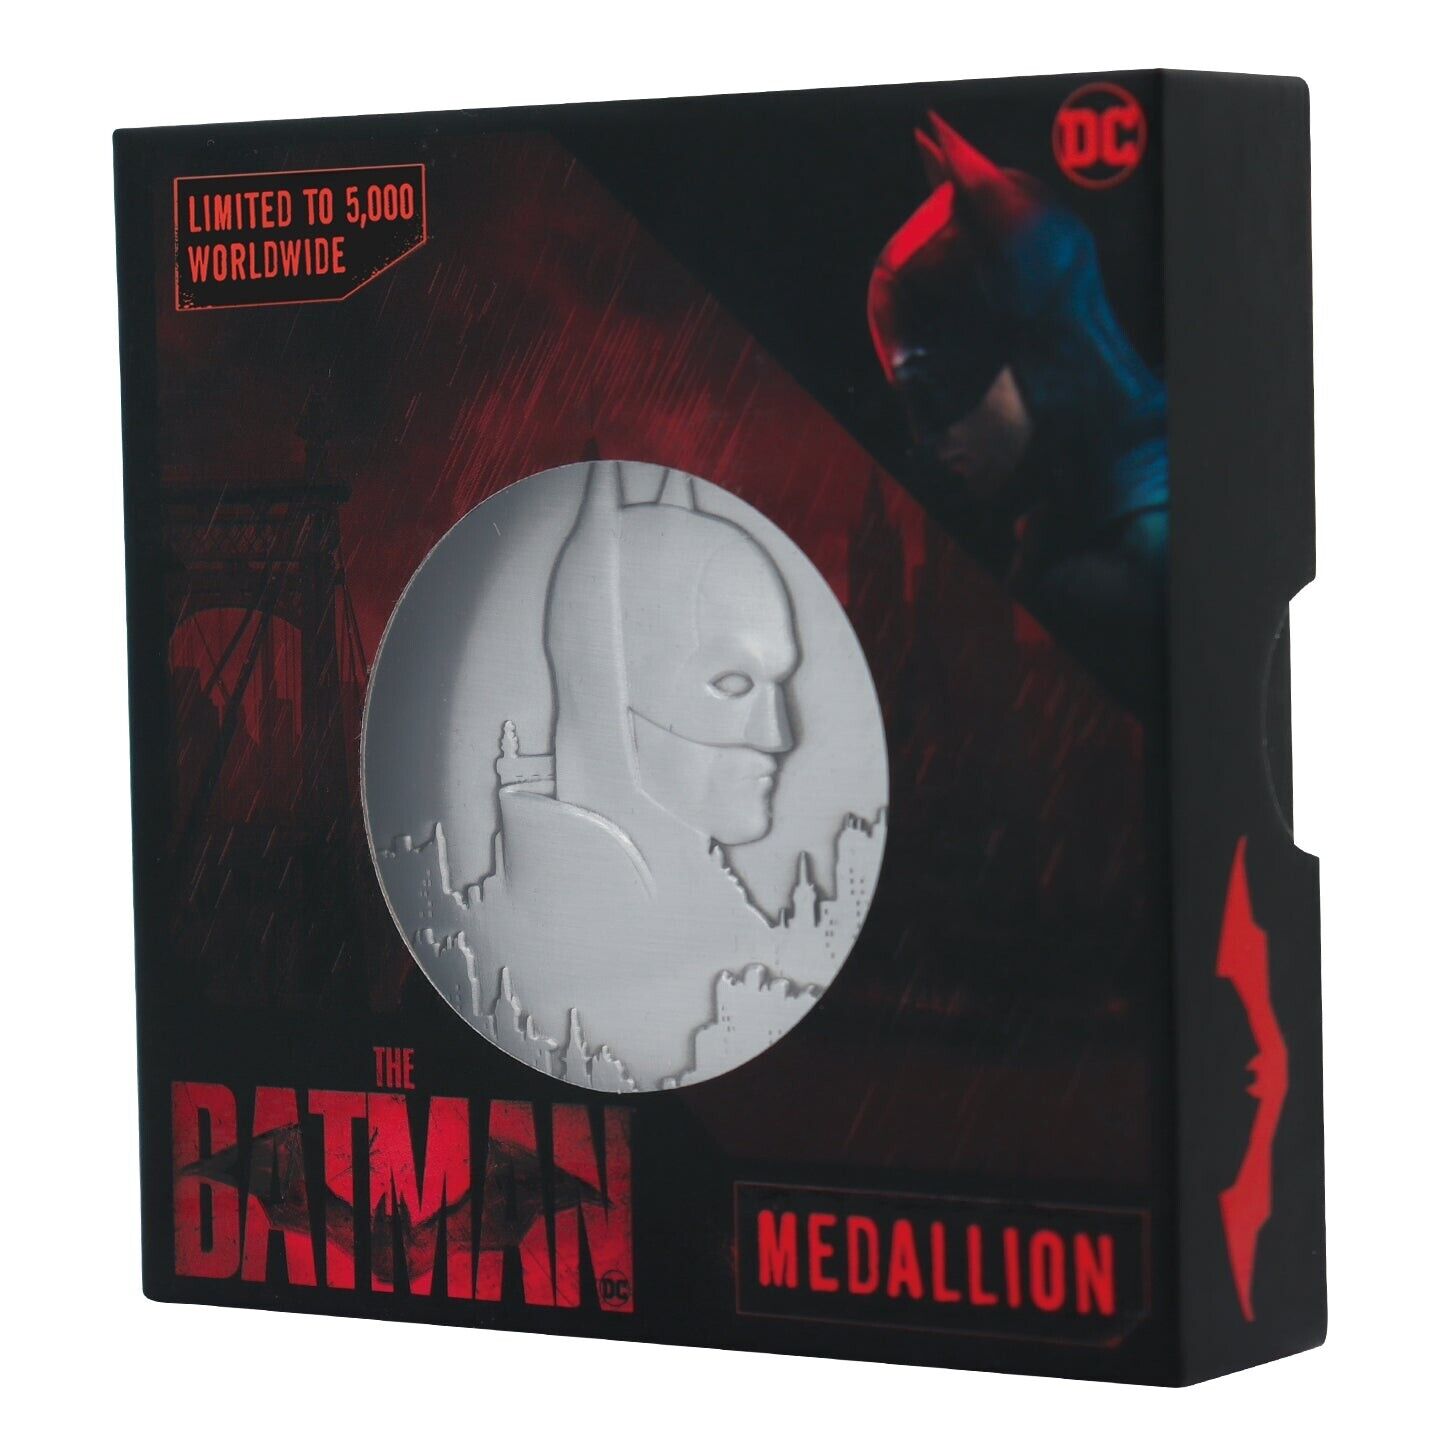 DC The Batman Limited Edition Medallion LE RARE (NUMBERED OUT OF 5,000)